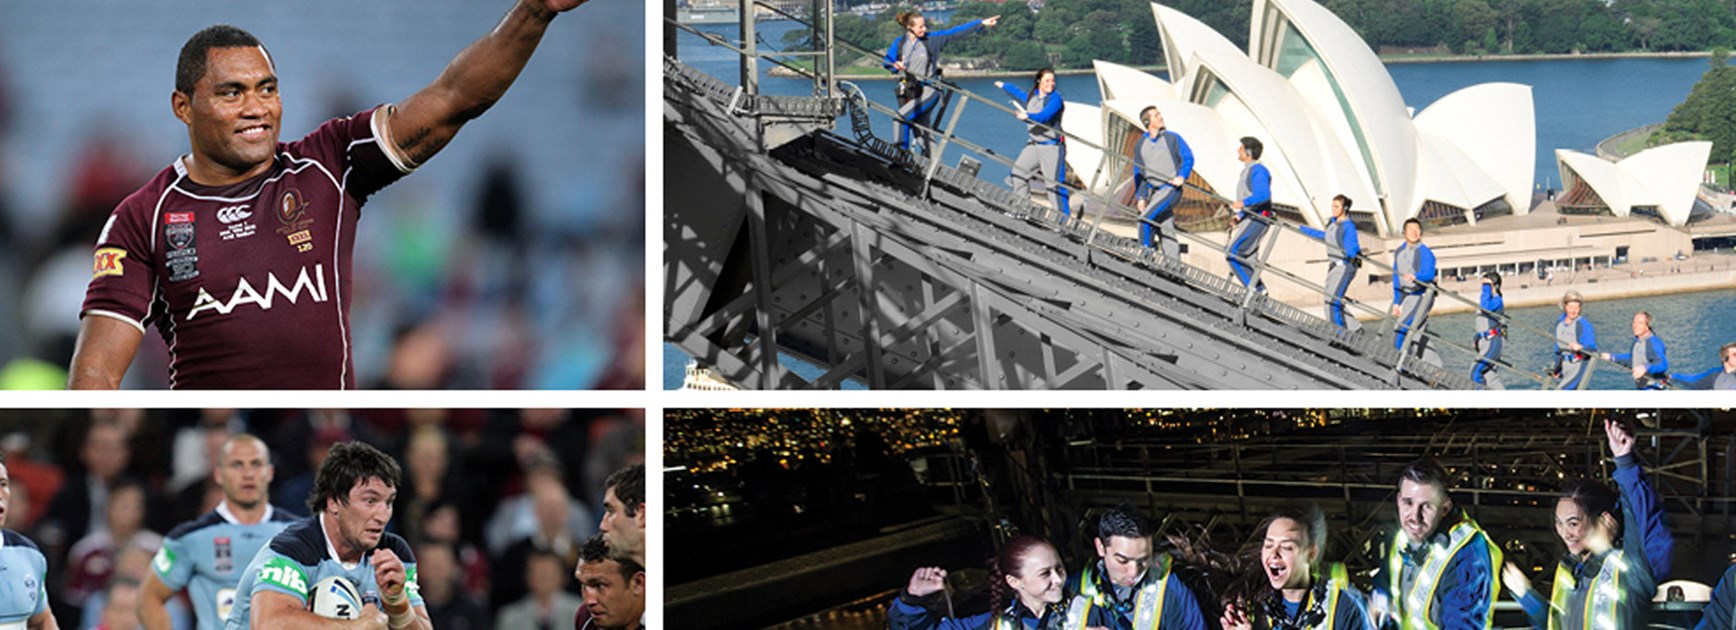 Climb the Sydney Harbour Bridge with legends of State of Origin on the eve of Game One of the 2016 series.